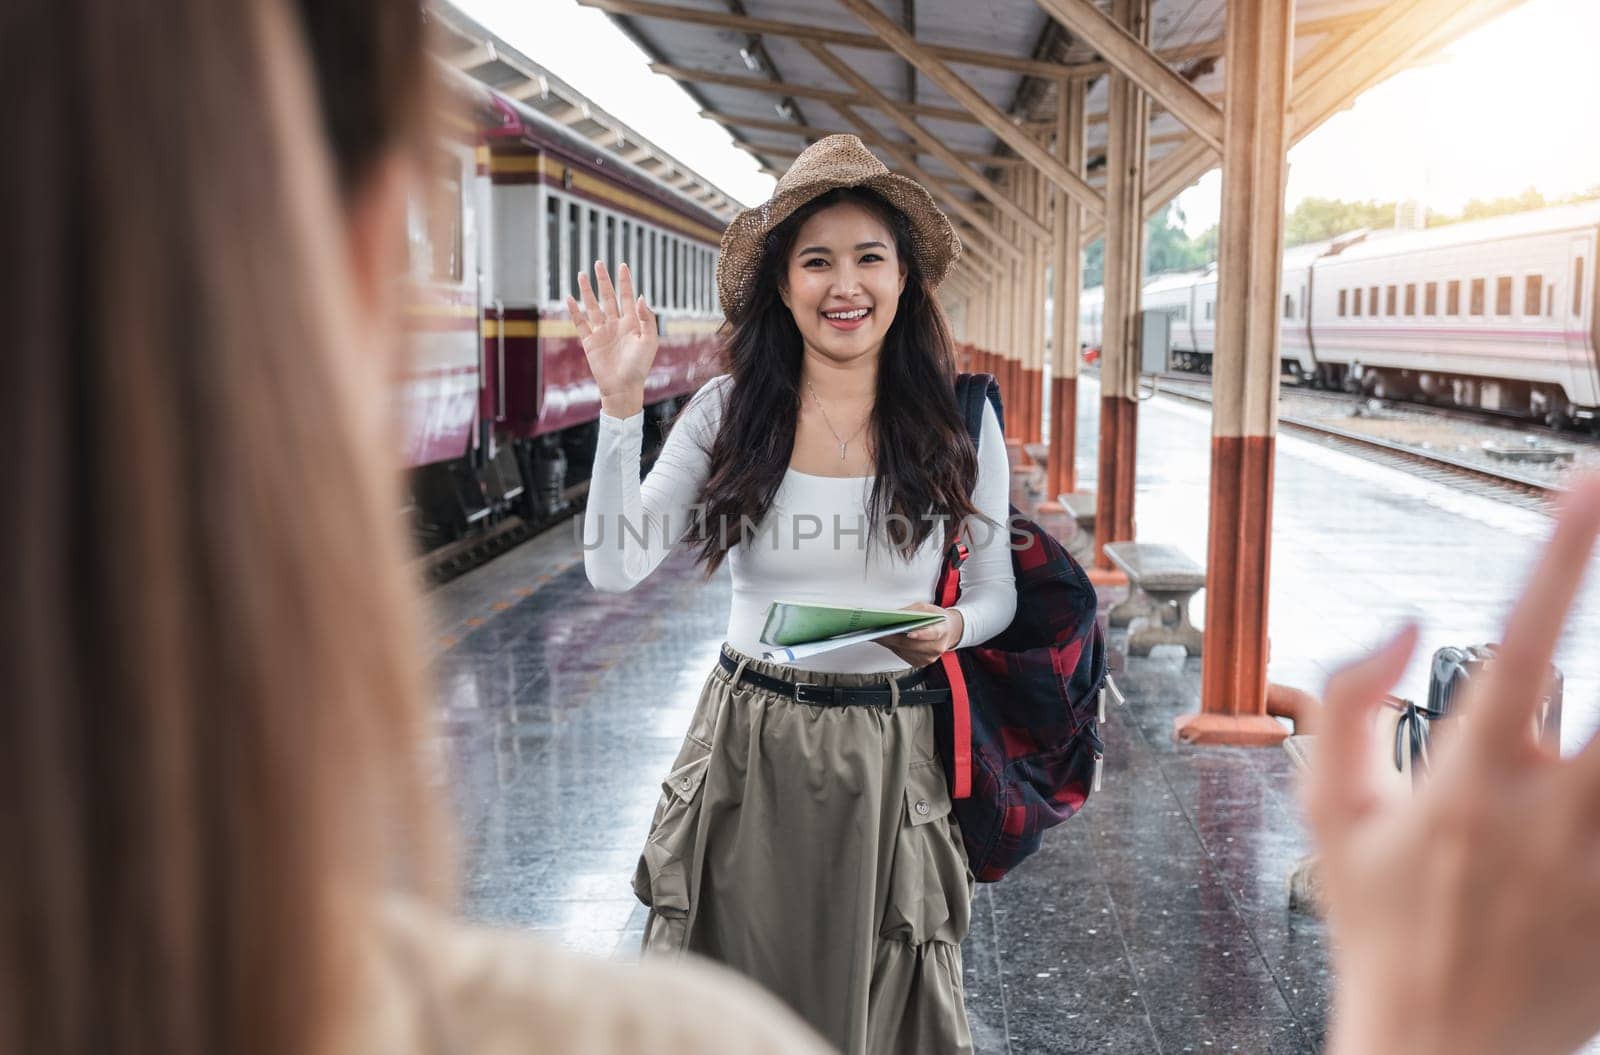 young female tourist smiles and greets a fellow passenger she just met while waiting for a train at the train station..